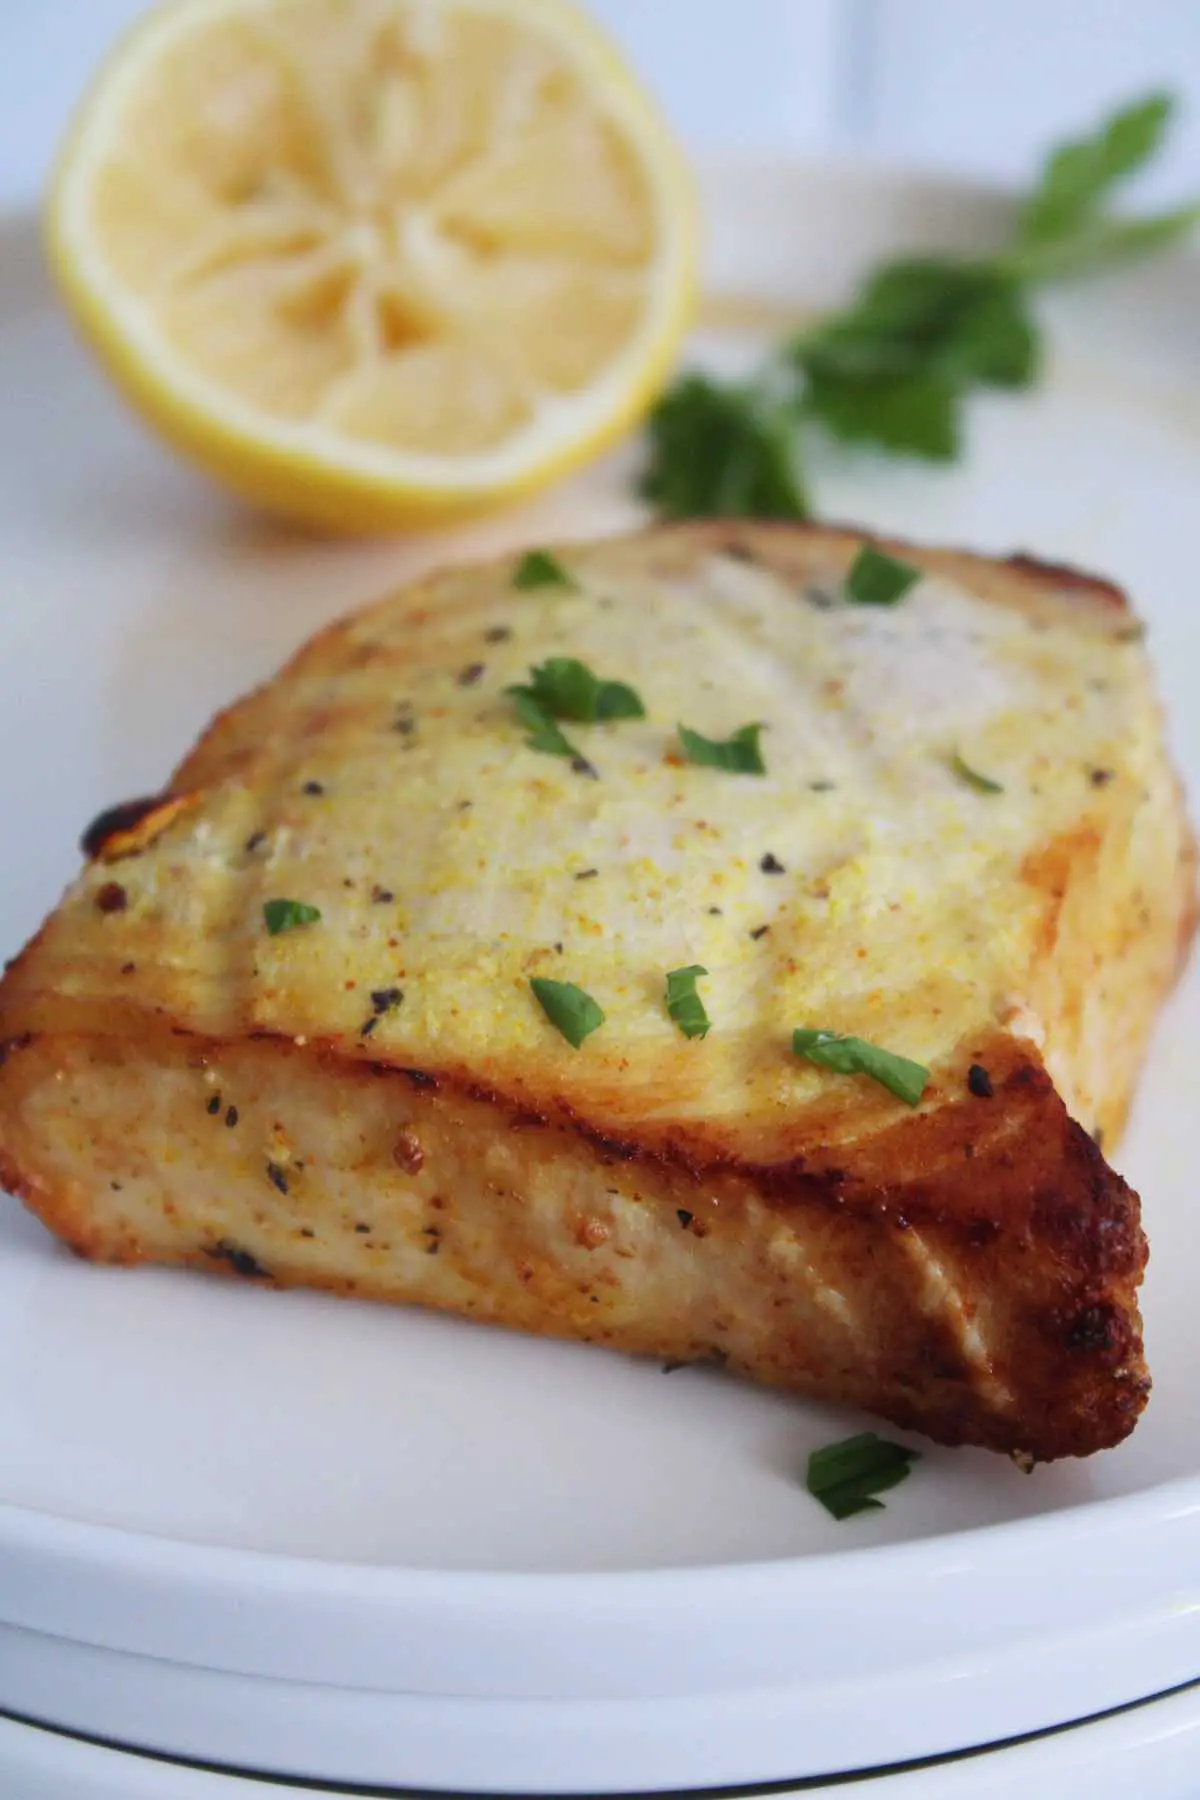 Air fryer swordfish steak is made in under 15 minutes. It's great for busy weeknights.